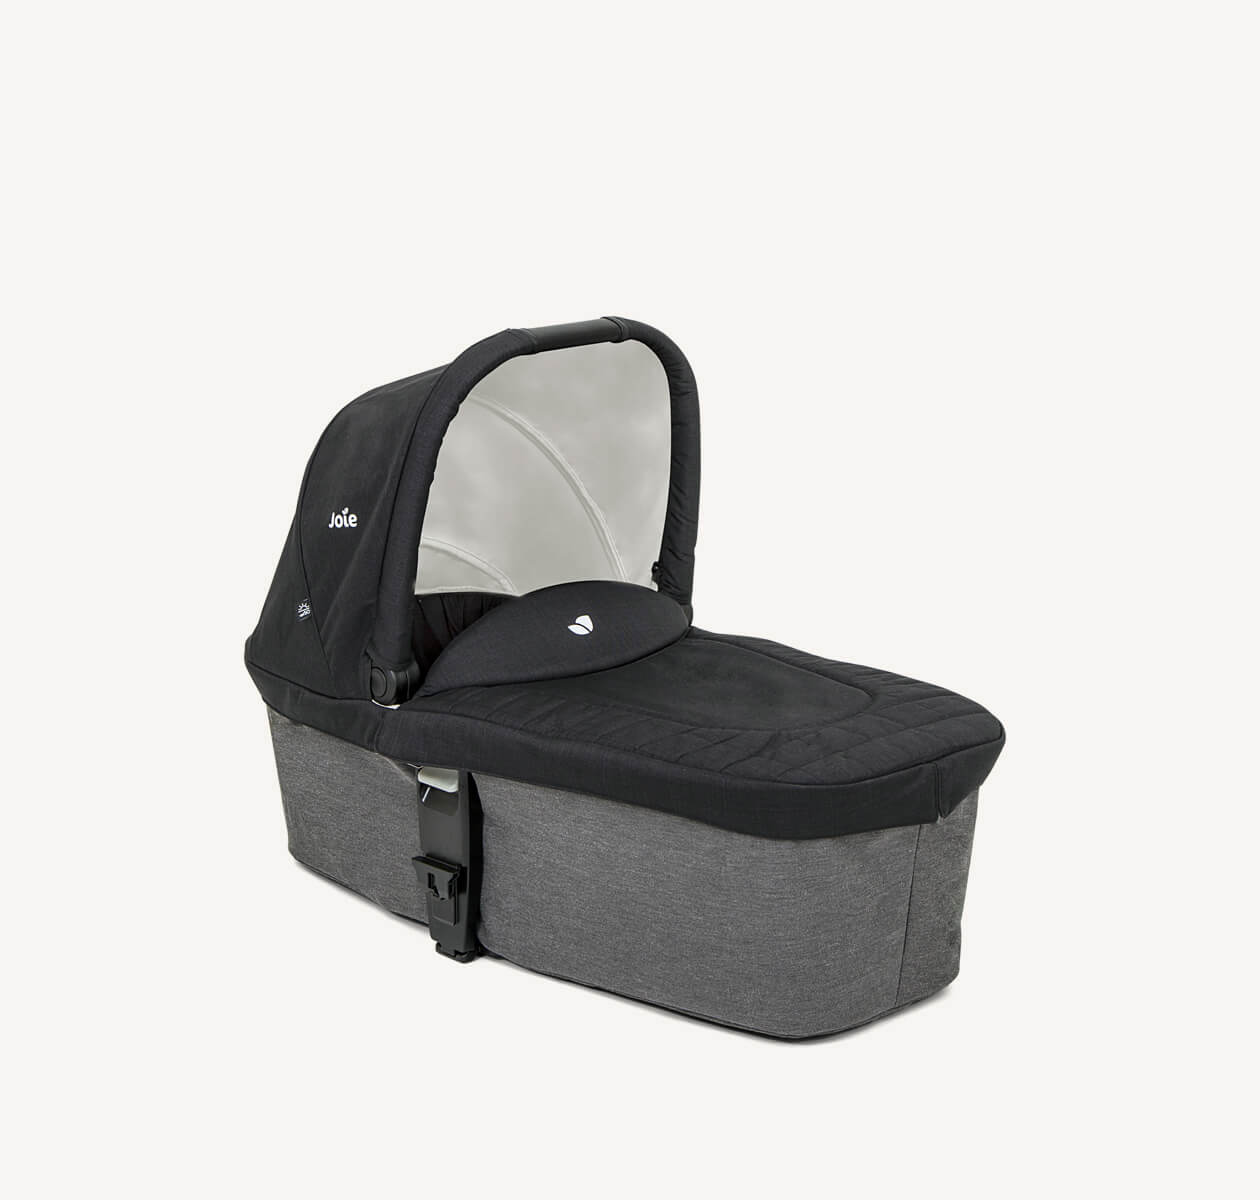  Joie chrome carry cot in black and gray at a right angle. 